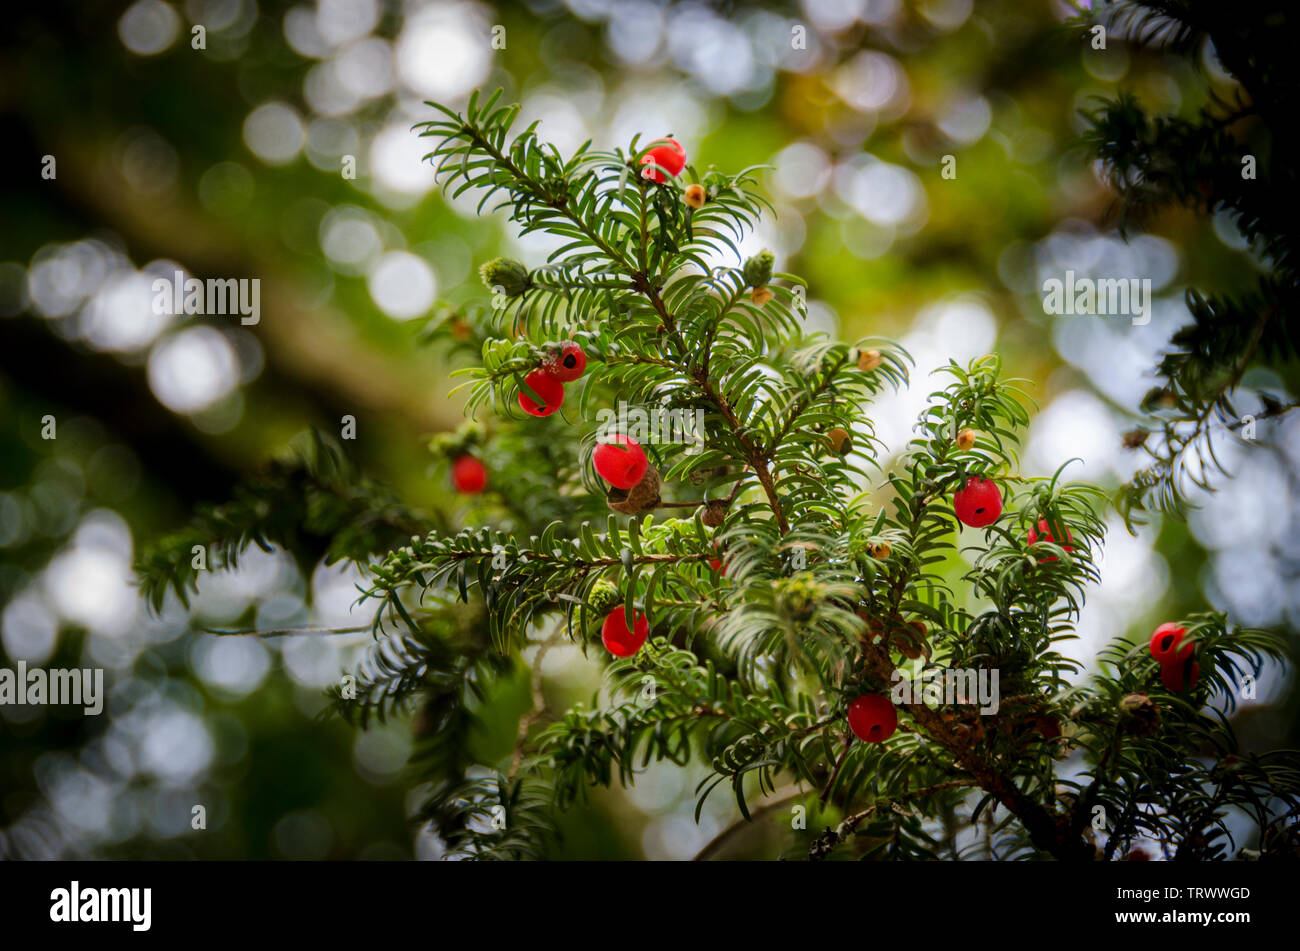 A branch of a yew tree with red berries attached Stock Photo